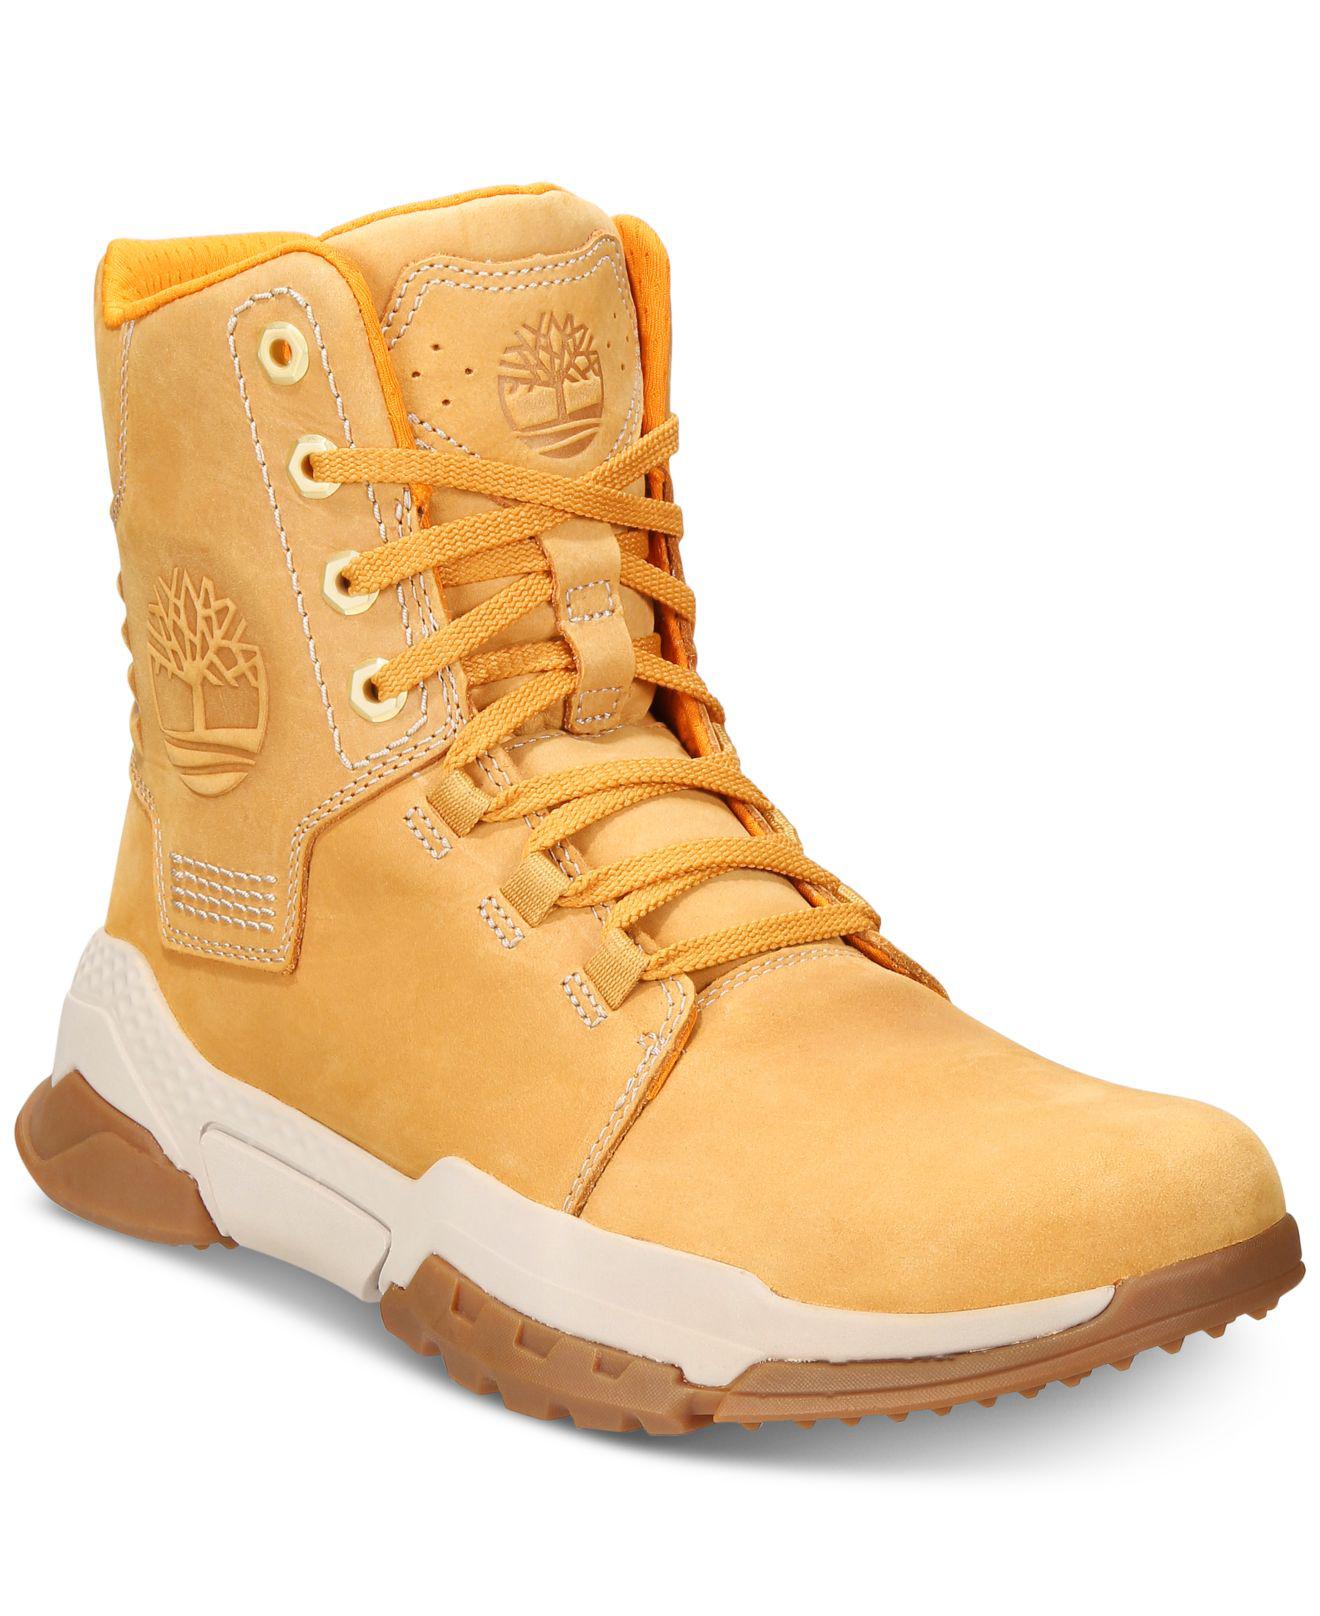 Buy > timberland city boots > in stock